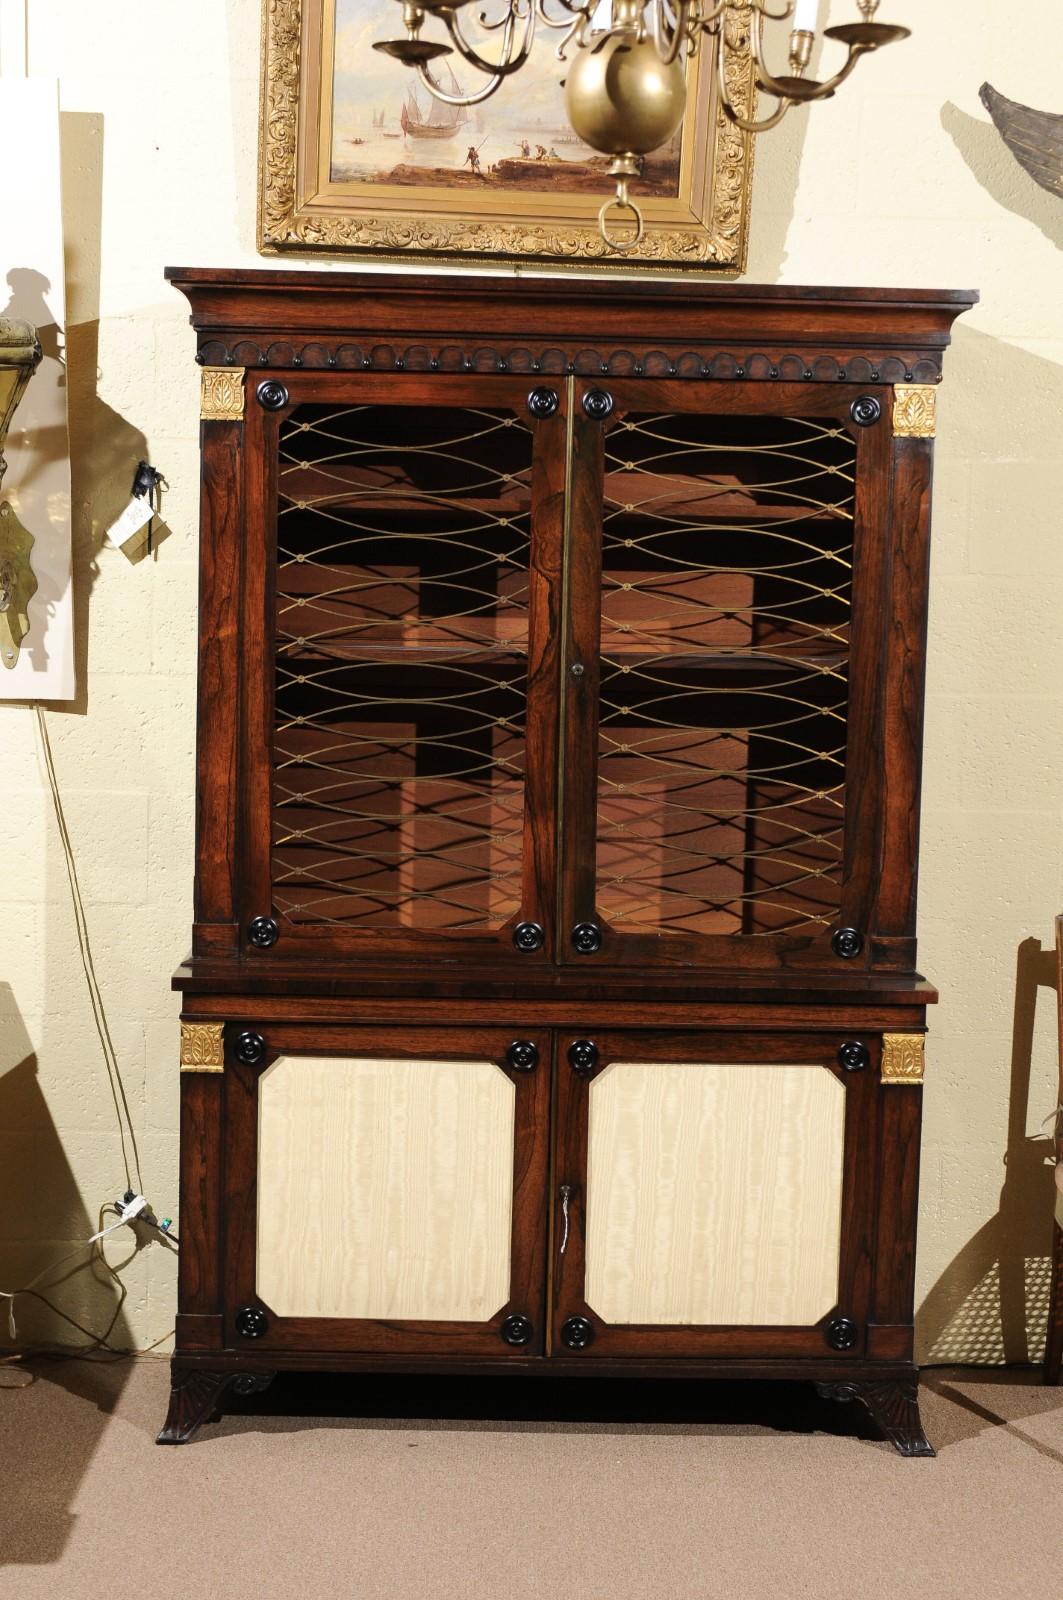 19th Century English Regency Style Rosewood Bookcase/Cabinet with Gilt Accents For Sale 13